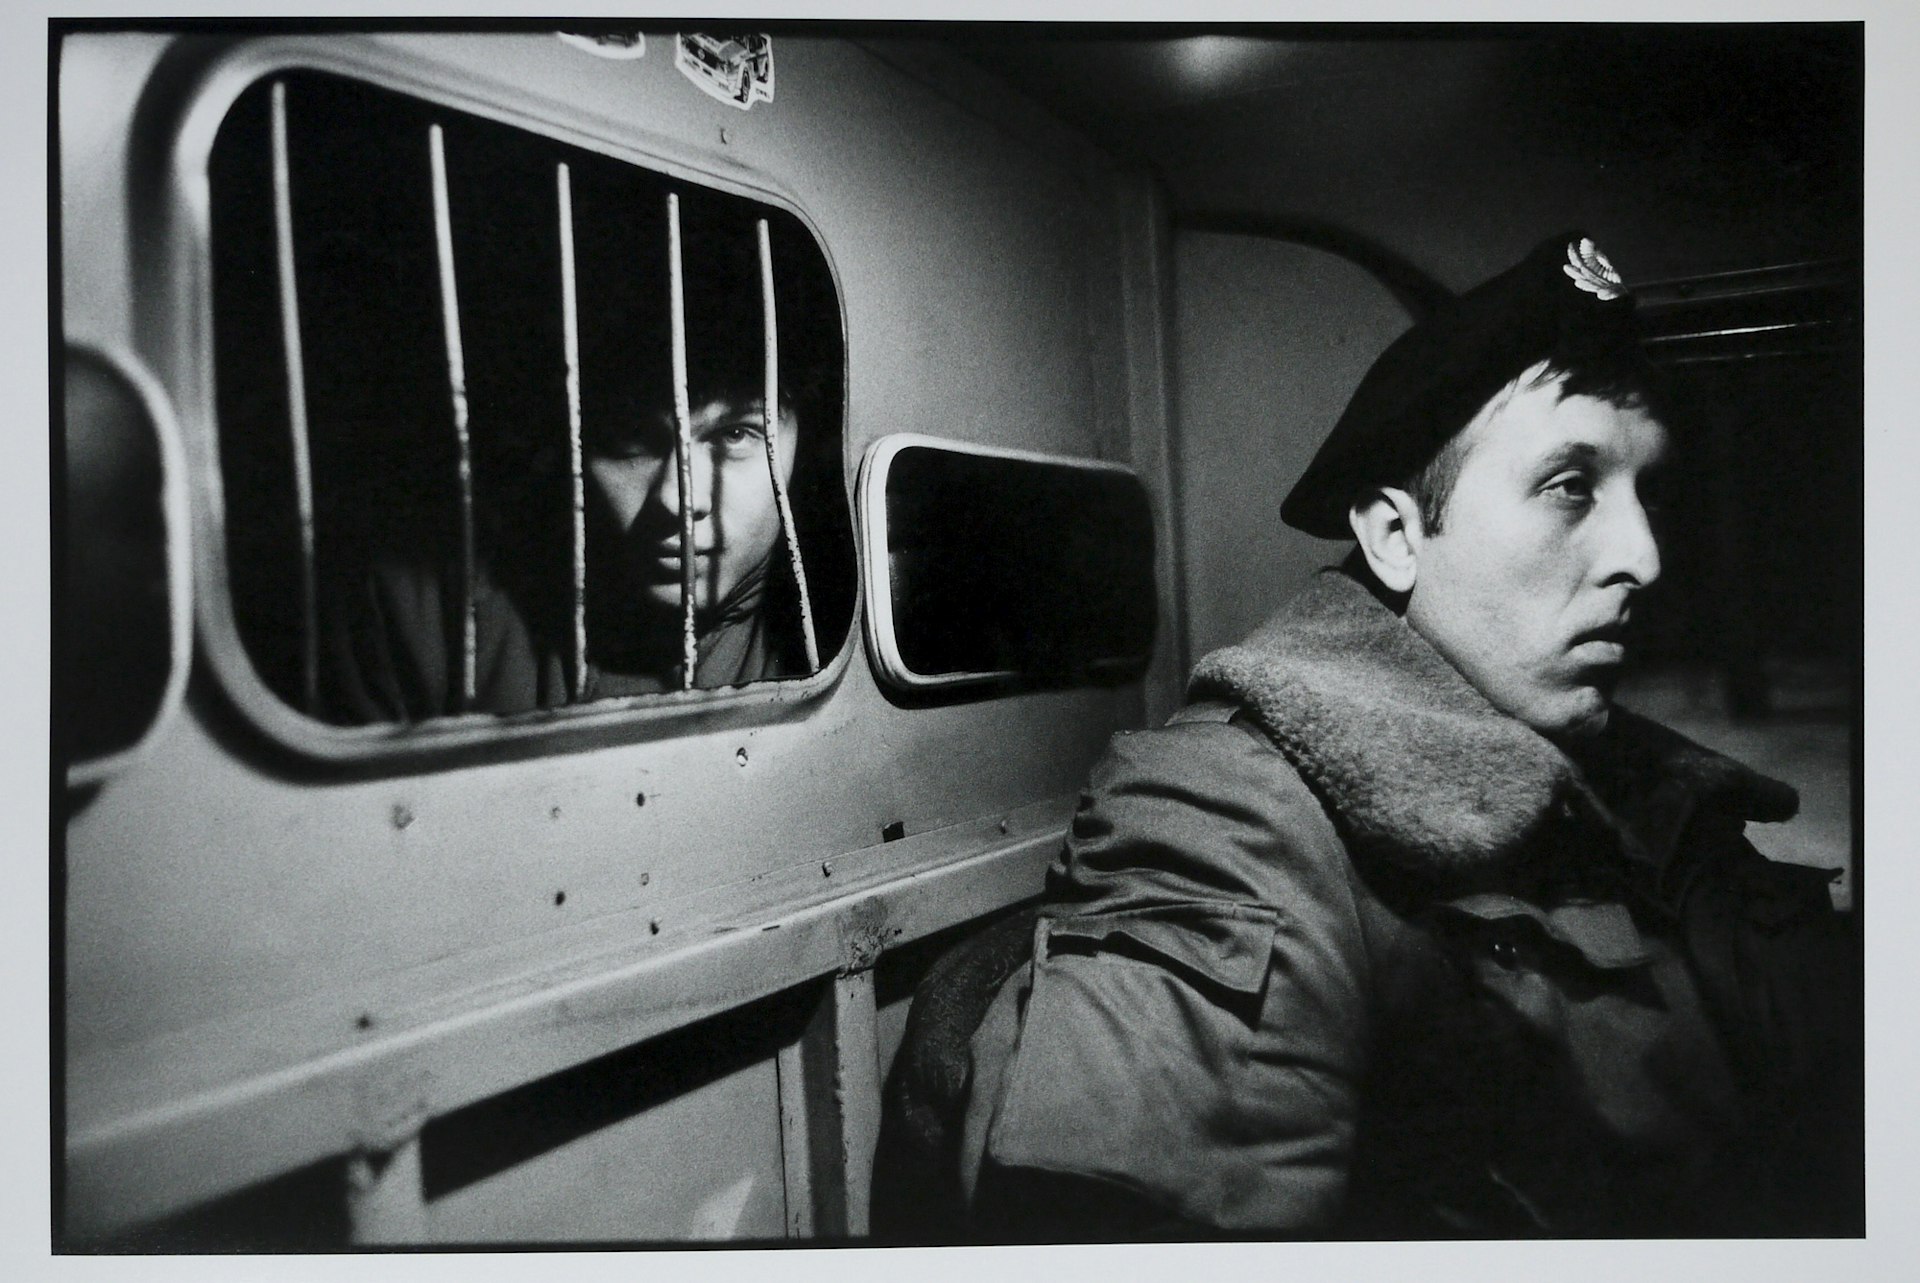 A drunk in the back of a police van, December 1992.